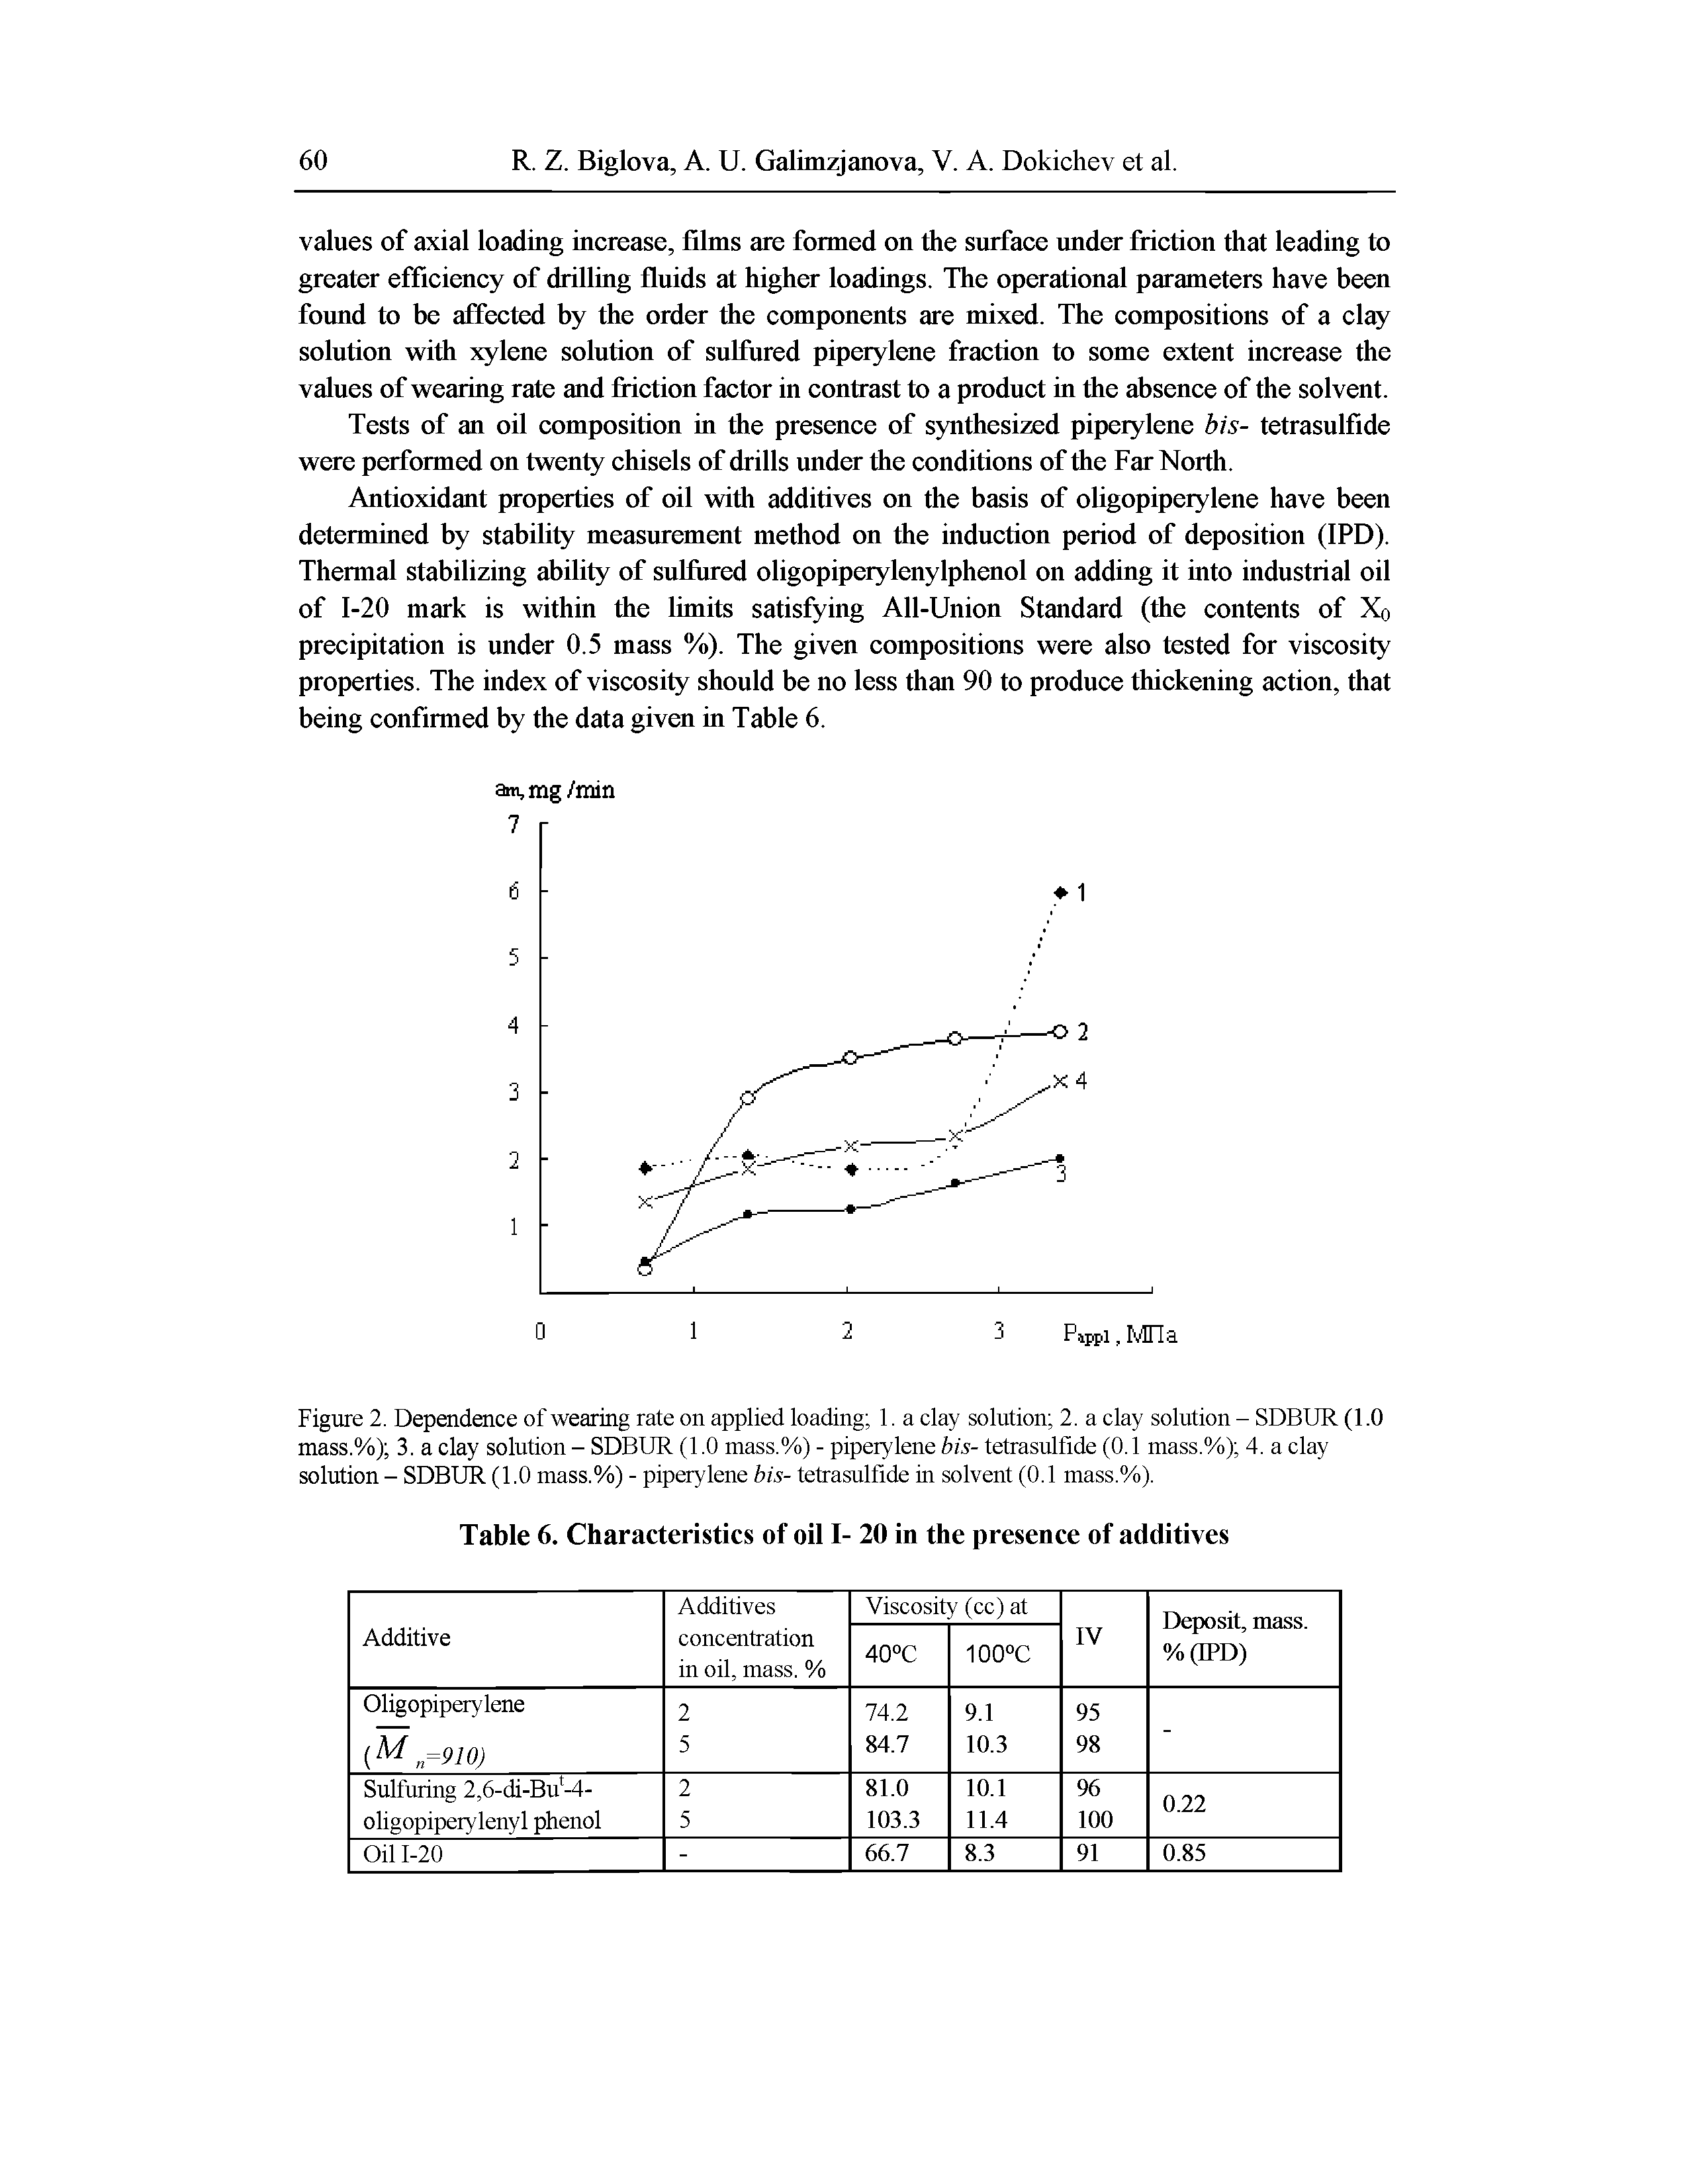 Figure 2. Dependence of wearing rate on applied loading 1. a clay solution 2. a clay solution - SDBUR (1.0 mass.%) 3. a clay solution - SDBUR (1.0 mass.%) - piperylene bis- tetrasulfide (0.1 mass.%) 4. a clay solution - SDBUR (1.0 mass.%) - piperylene bis- tetrasulfide in solvent (0.1 mass.%).